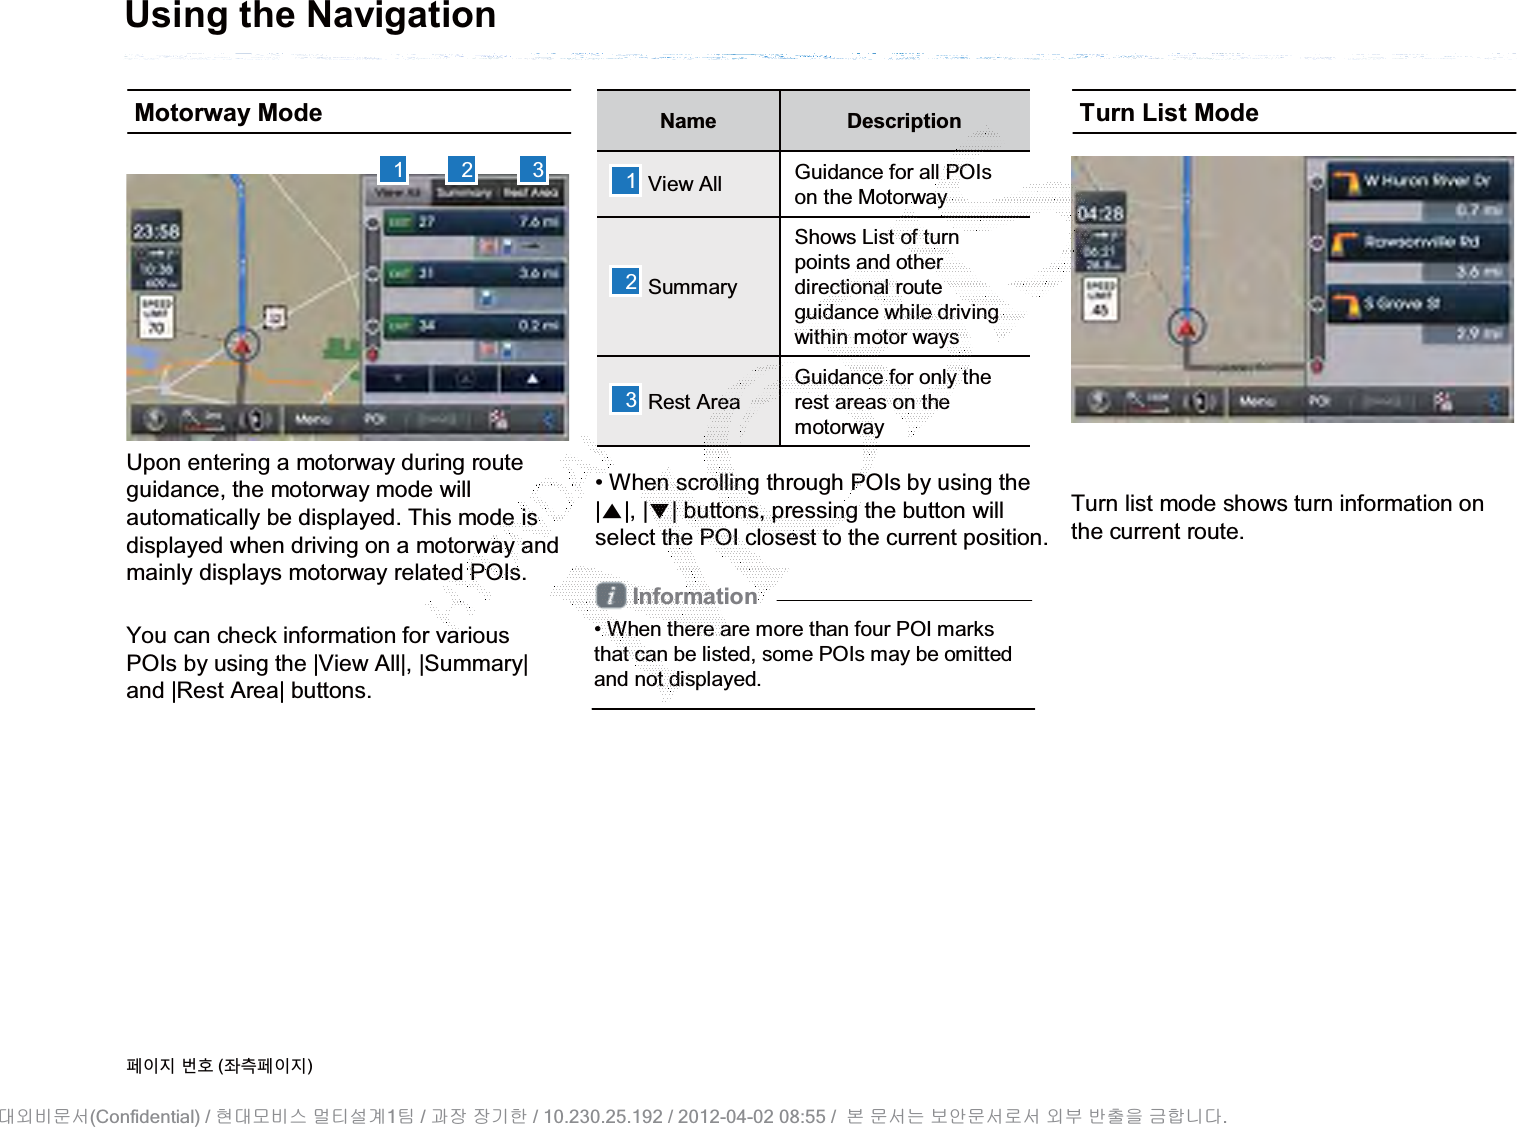 Using the NavigationMotorway ModeUpon entering a motorway during routeguidance, the motorway mode will automatically be displayed. This mode is displayed when driving on a motorway andmainly displays motorway related POIs.You can check information for variousPOIs by using the |View All|, |Summary|and |Rest Area| buttons.Name DescriptionView All Guidance for all POIs on the MotorwaySummaryShows List of turn points and other directional routeguidance while driving within motor waysRest AreaGuidance for only the rest areas on the motorway• When scrolling through POIs by using the |ɀ|, |Ɂ| buttons, pressing the button will select the POI closest to the current position. Information• When there are more than four POI marks that can be listed, some POIs may be omitted and not displayed.Turn List ModeTurn list mode shows turn information onthe current route.1 2 3 123૓ࢇए ء୎ (্ࣛ૓ࢇए)(Confidential) /    1  /     / 10.230.25.192 / 2012-04-02 08:55 /             .␴㞬⽸ⱬ㉐ 䜸␴⯜⽸㏘ ⭴䐤㉘᷸ 䐴 Ḱ㣙 㣙ὤ䚐 ⸬ ⱬ㉐⏈ ⸨㙼ⱬ㉐⦐㉐ 㞬⺴ ⵌ㻐㡸 Ἴ䚝⏼␘